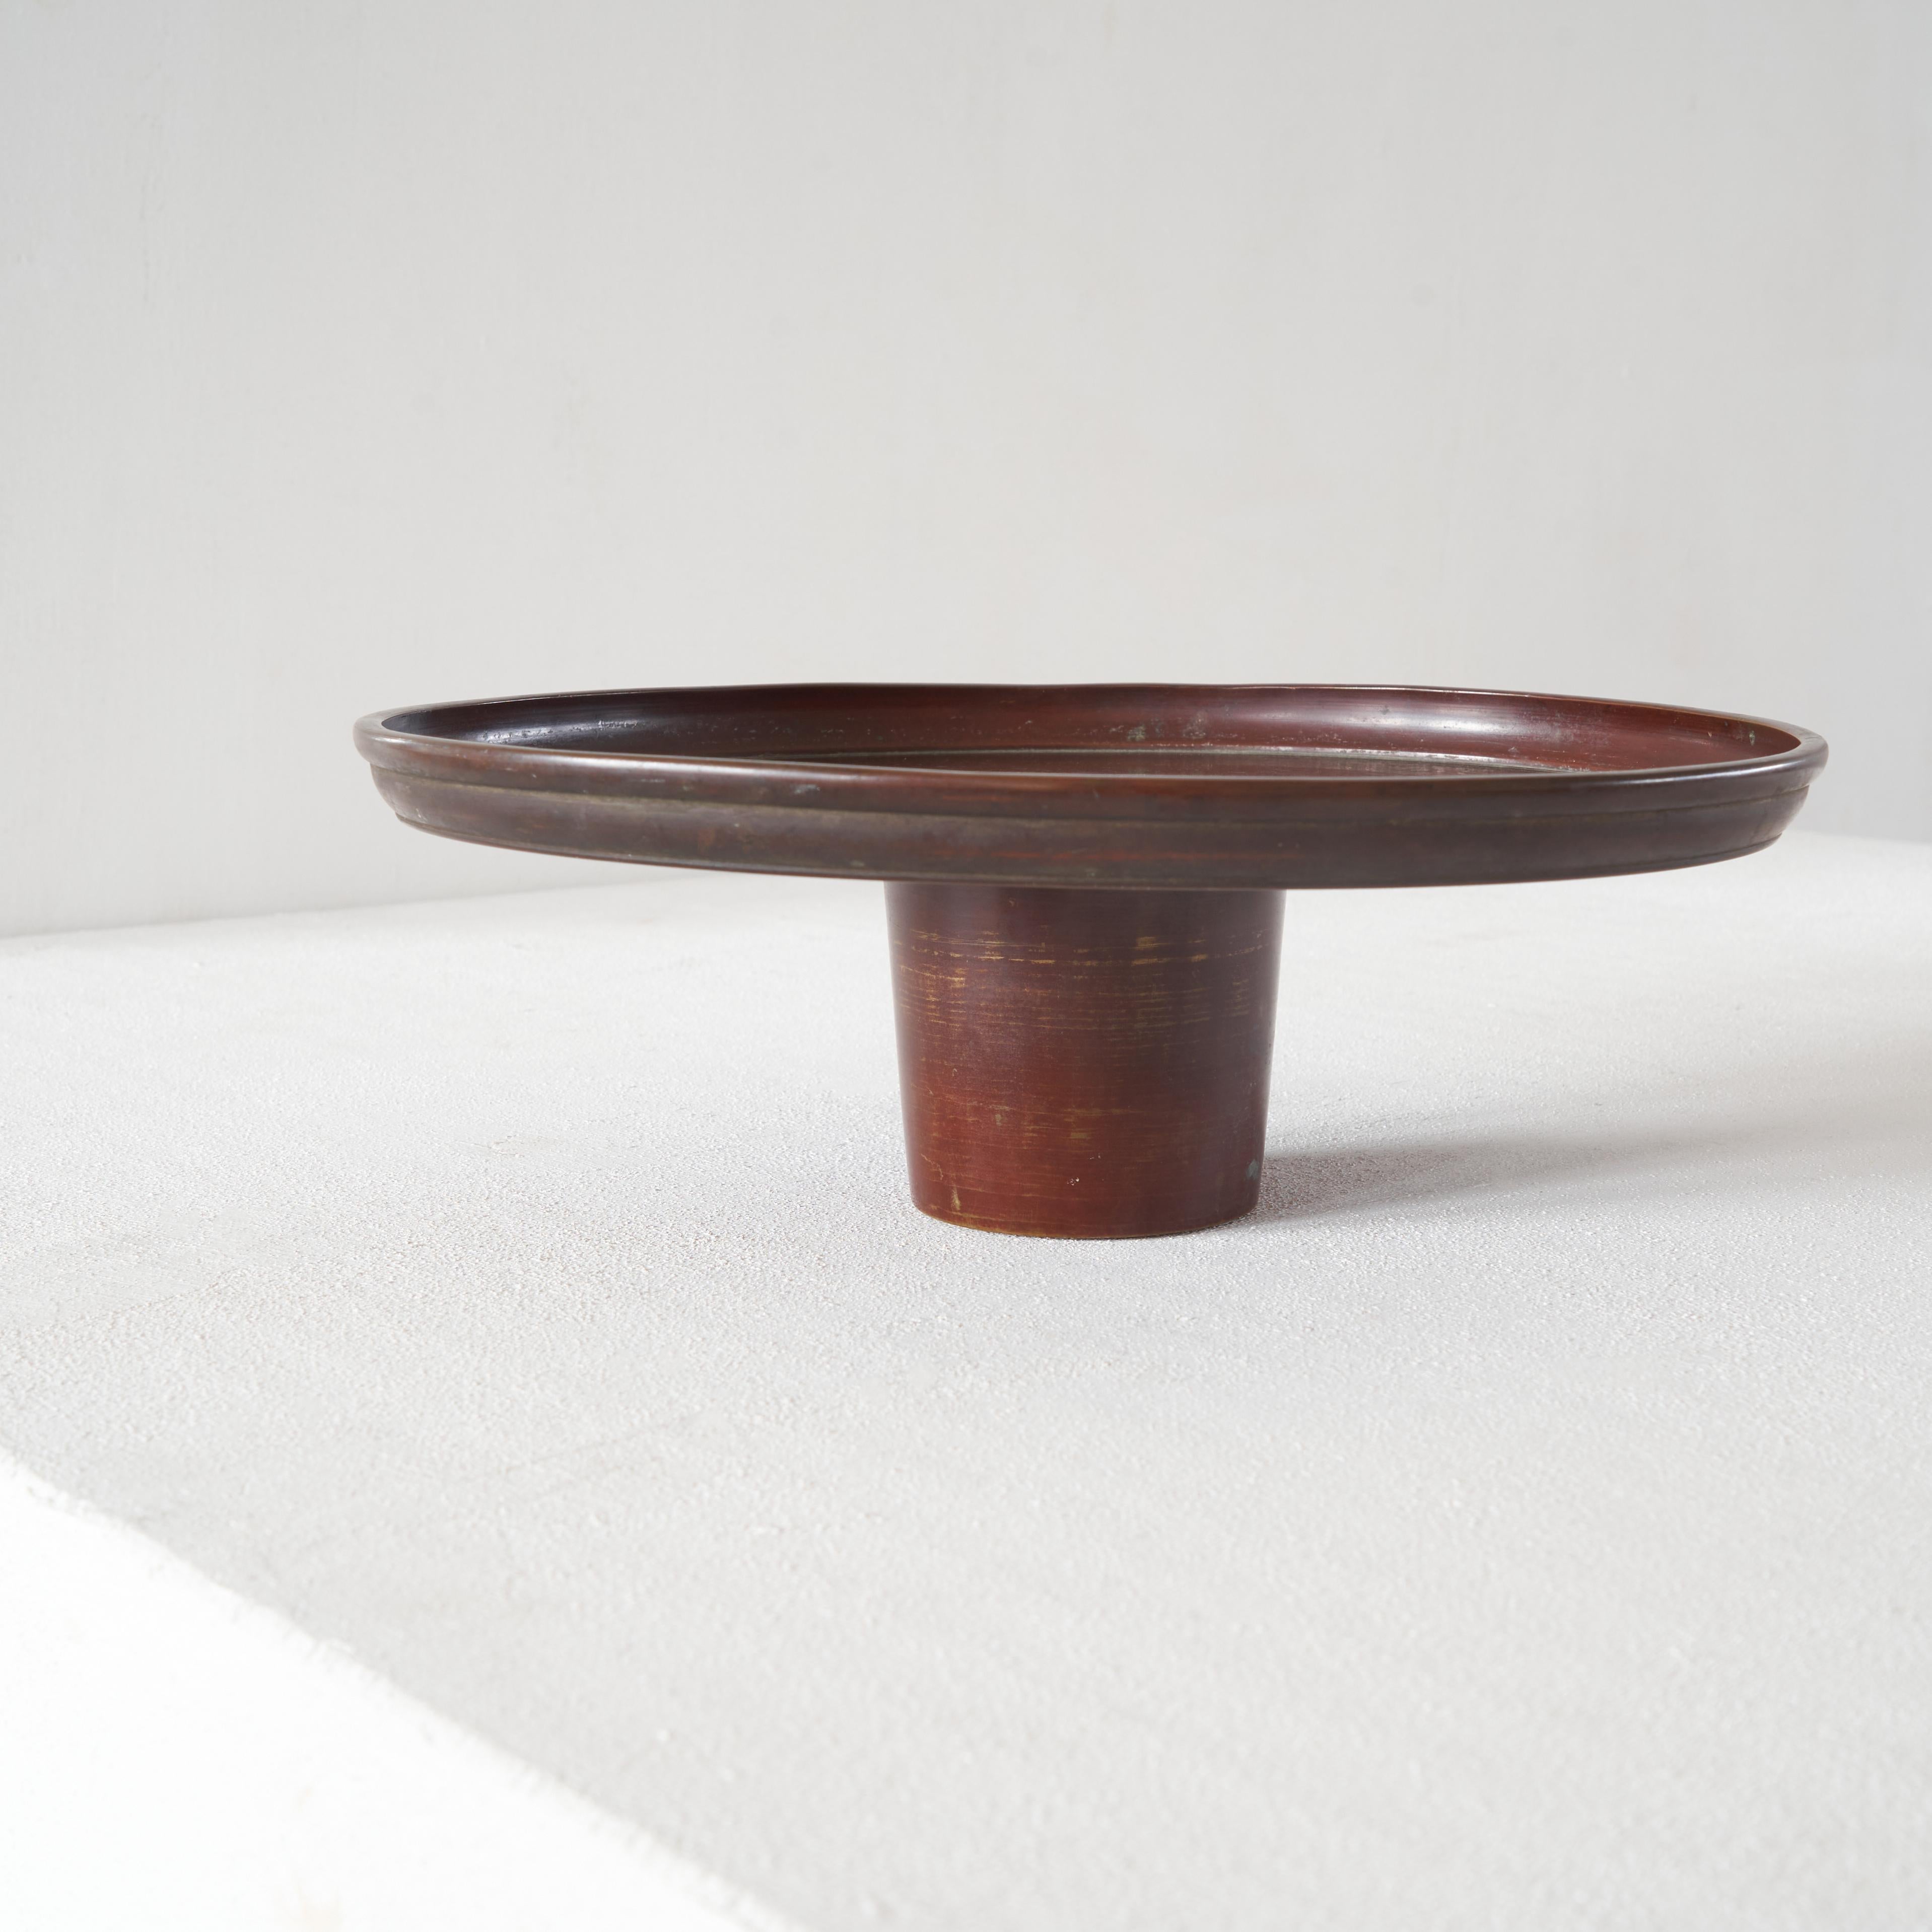 Refined Japanese modernist bowl. Showa Era - 1926-1989, Japan.

Simple but powerful in shape and refined in detail, this modernist bowl will fascinate for years to come. From the beveled edge to the ribbed inside, the design of this bowl is very